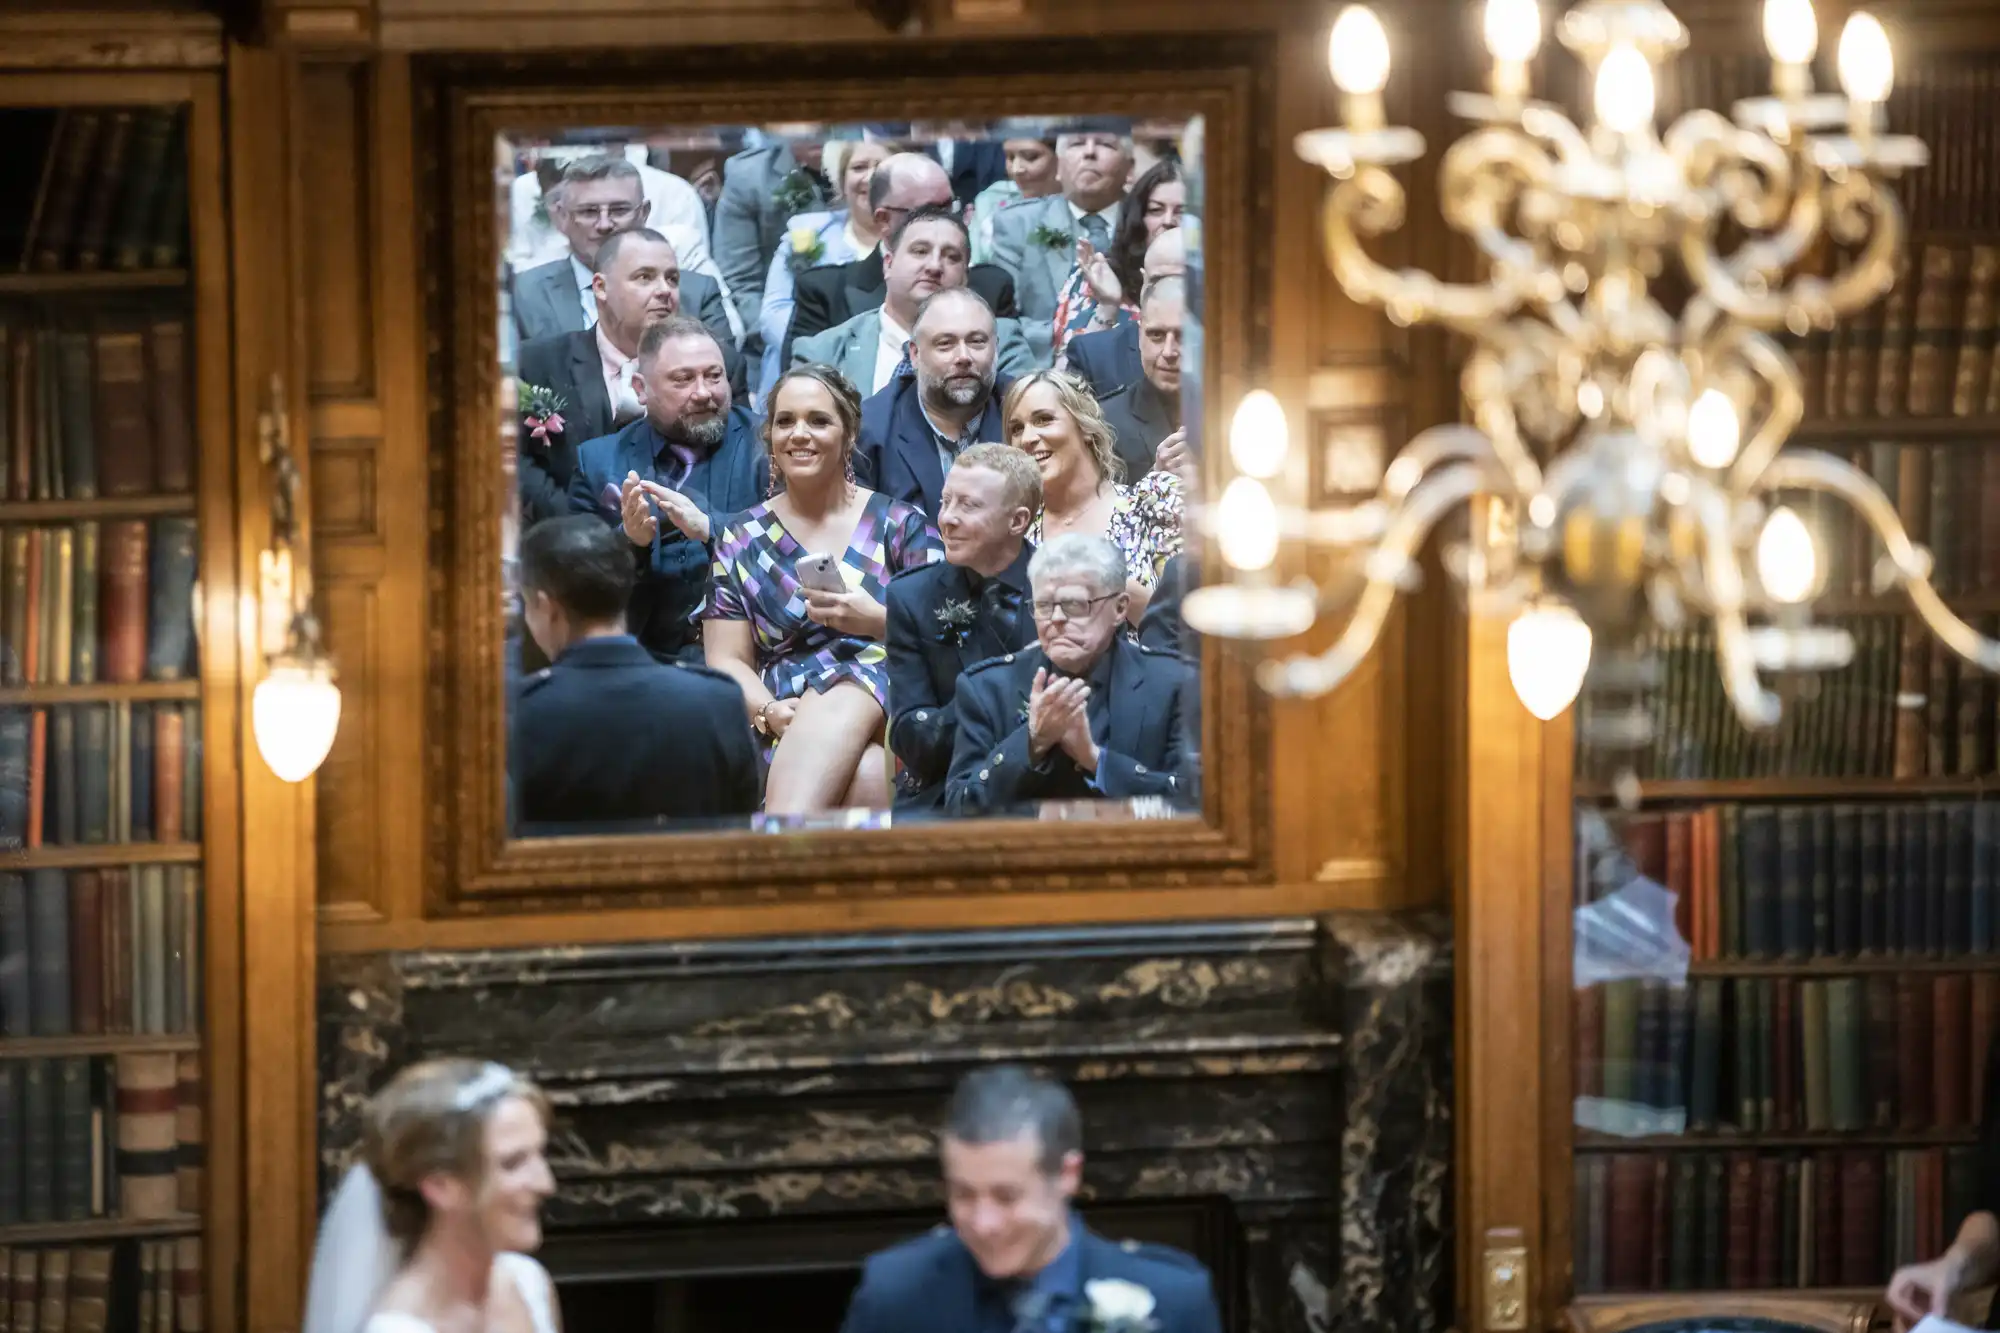 Guests at a wedding are reflected in a large framed mirror in a book-lined, chandelier-lit room, while the bride and groom are blurred in the foreground.